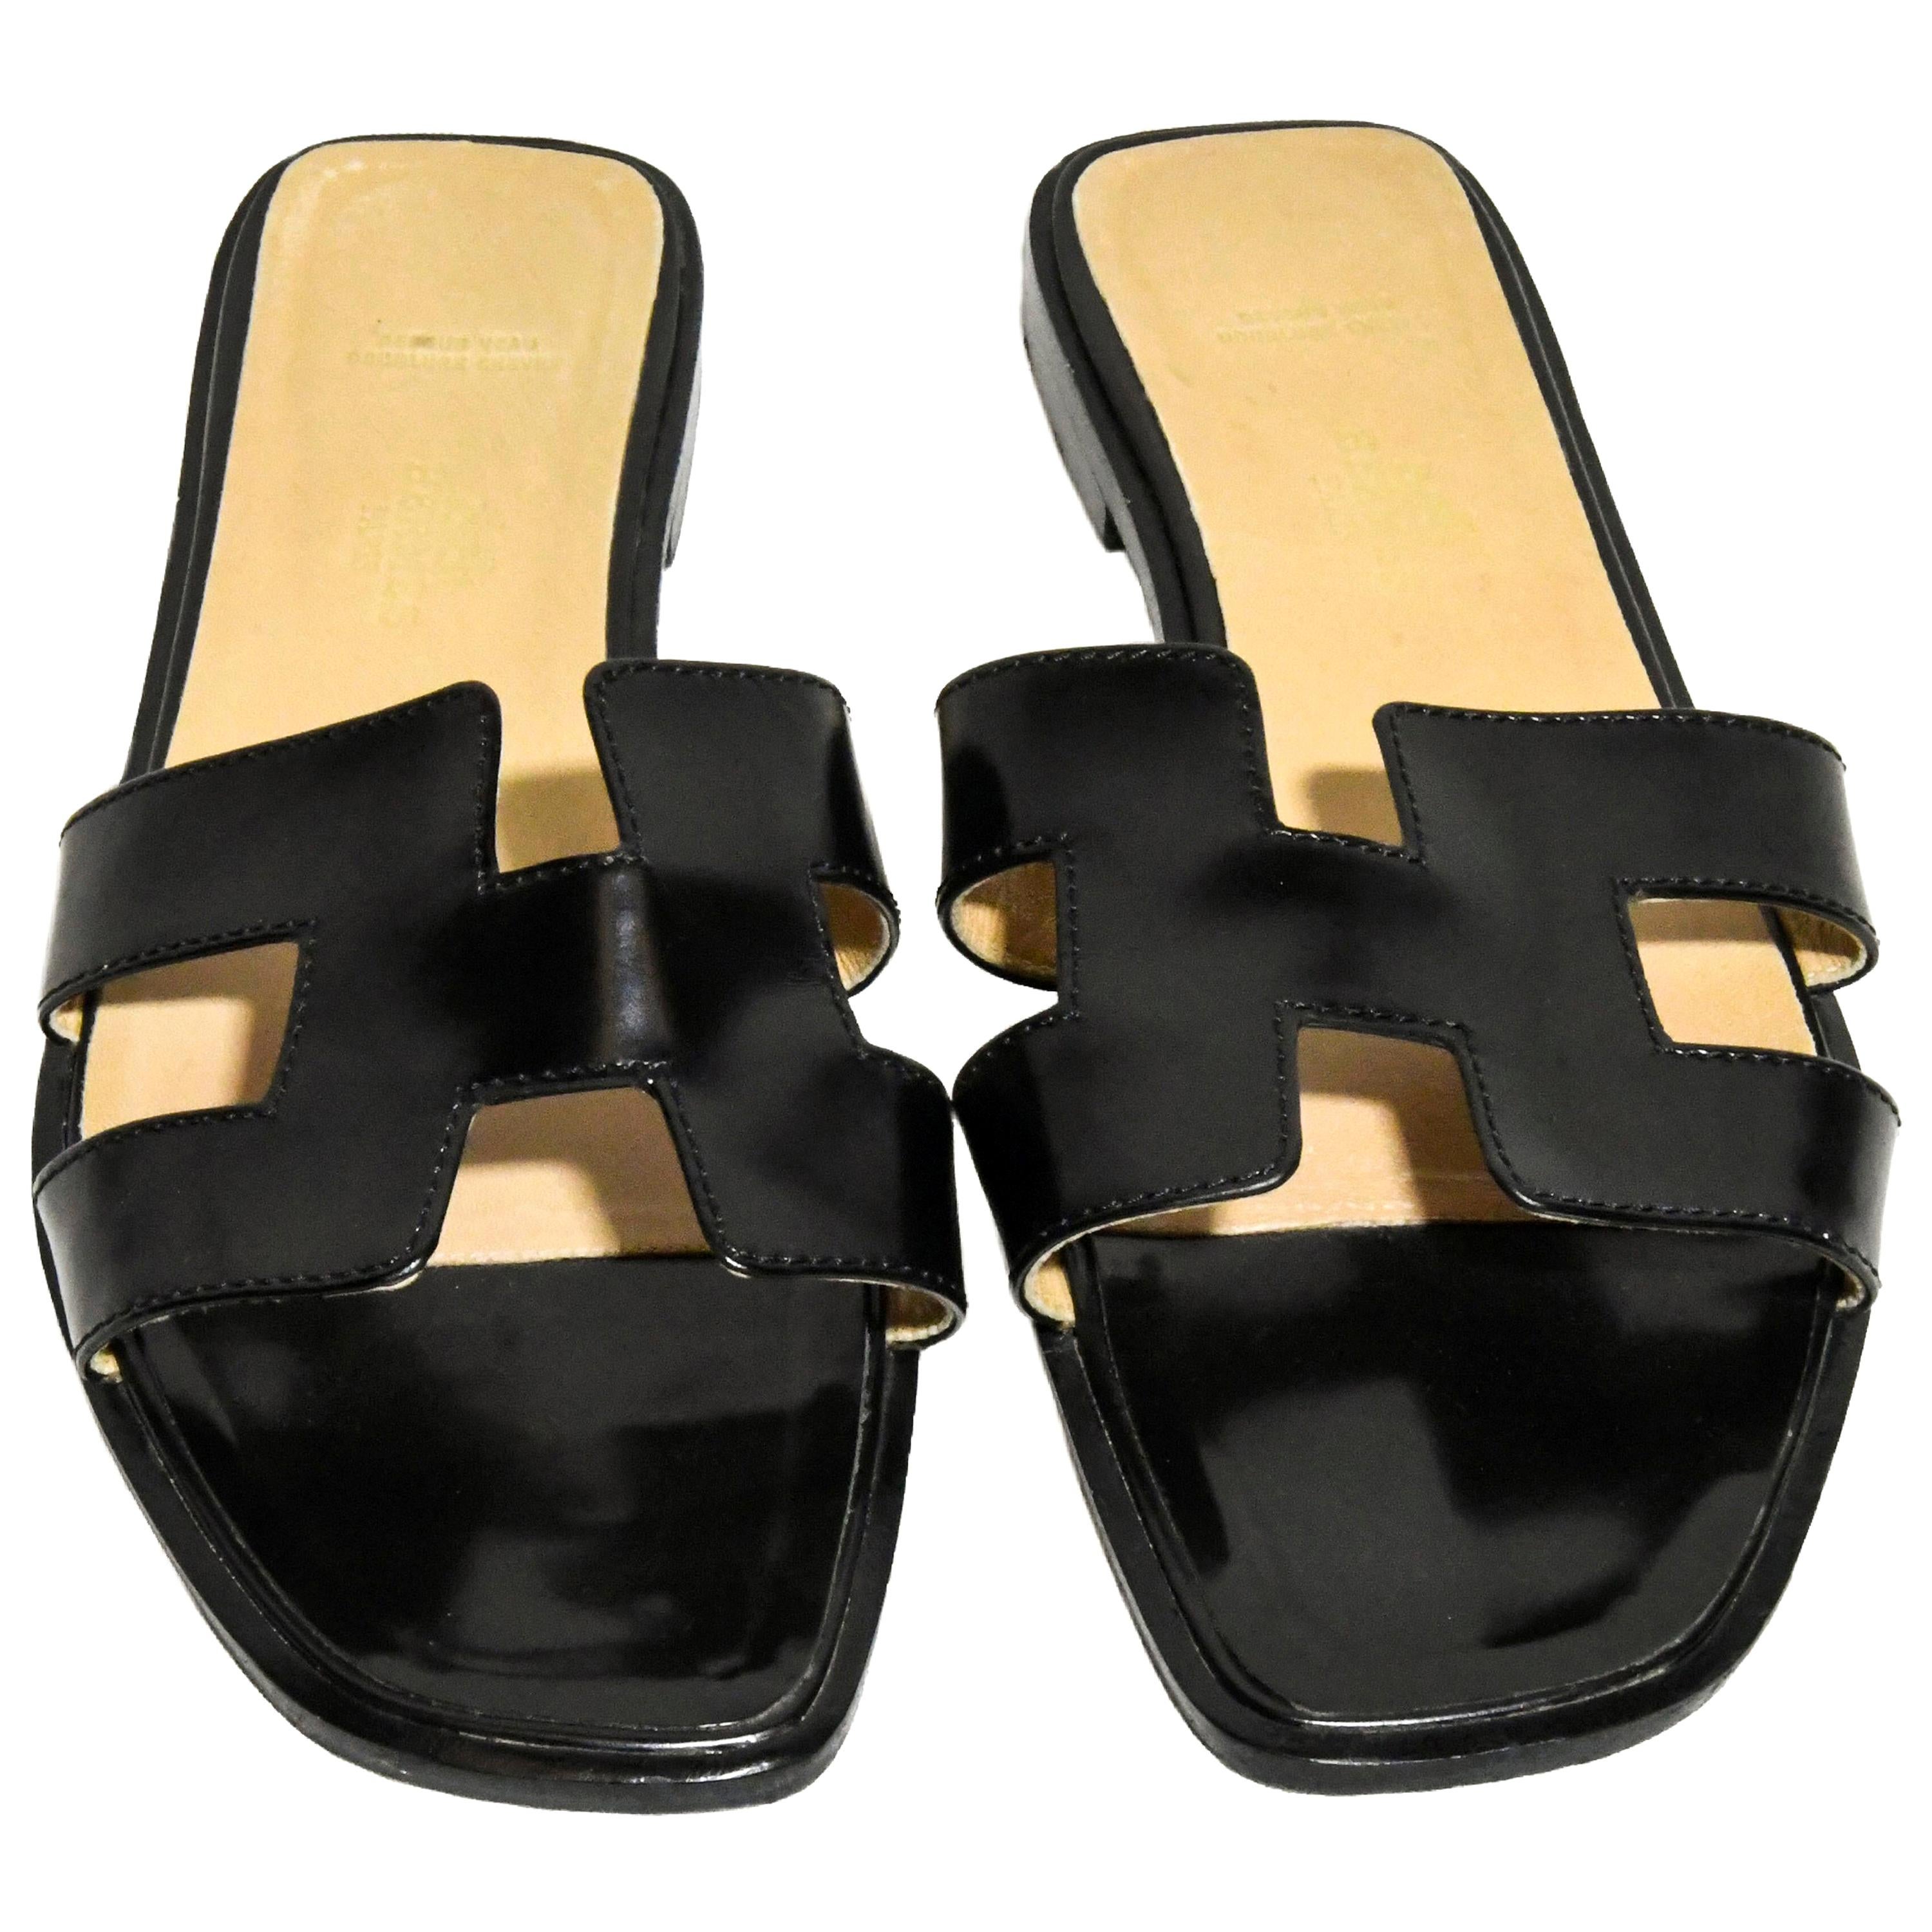 Hermes Black Box Leather Oran Sandals With H Crossover Hermes Strap